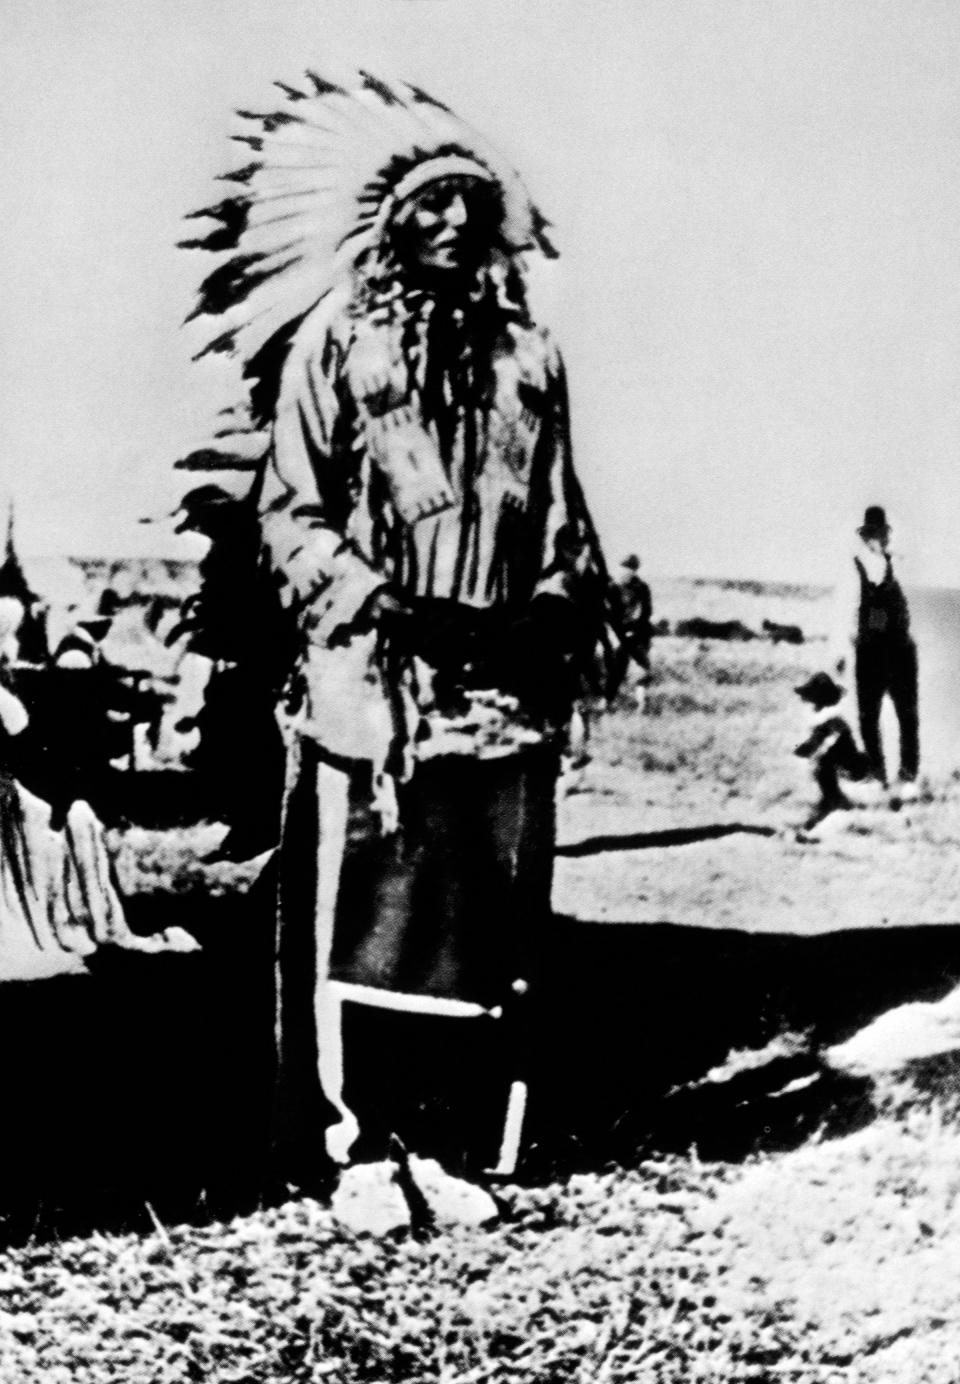 Chief Crazy Horse, circa 1870.<span class="copyright">Universal History Archive/Universal Images Group/Getty Images</span>